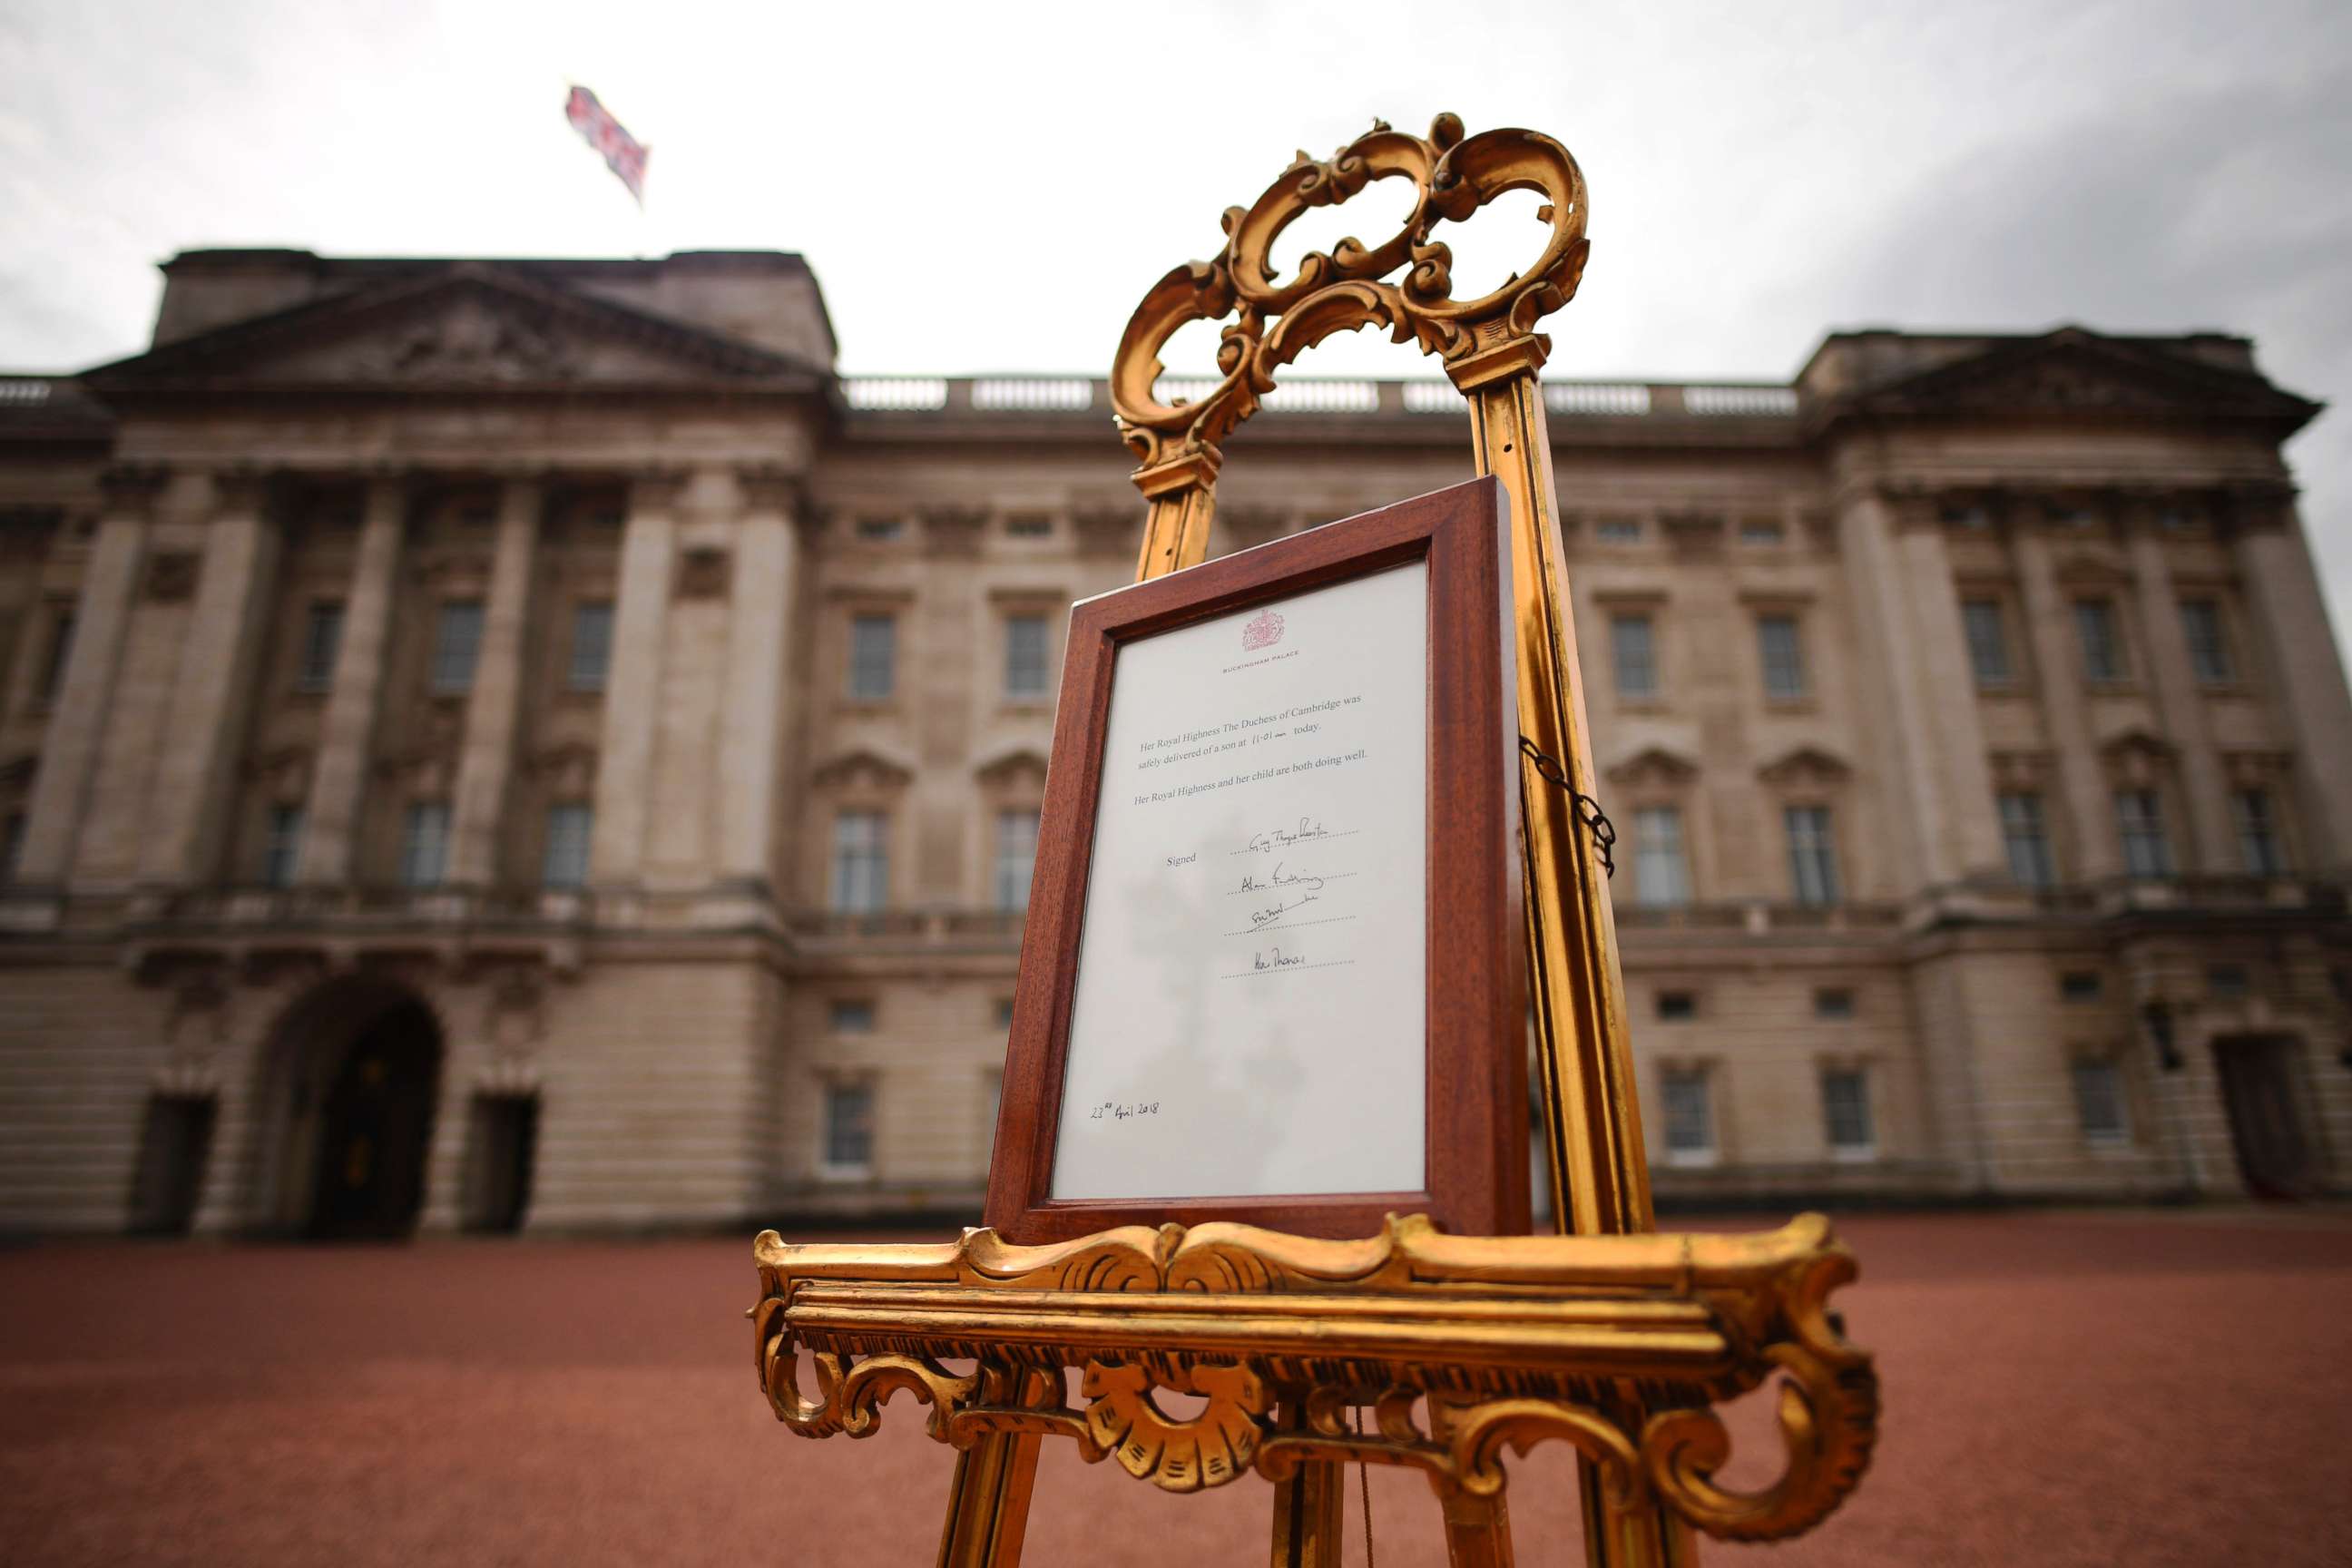 PHOTO: A notice is placed on an easel announcing the birth of the new Royal baby, in the forecourt of Buckingham Palace, in London, April 23, 2018.